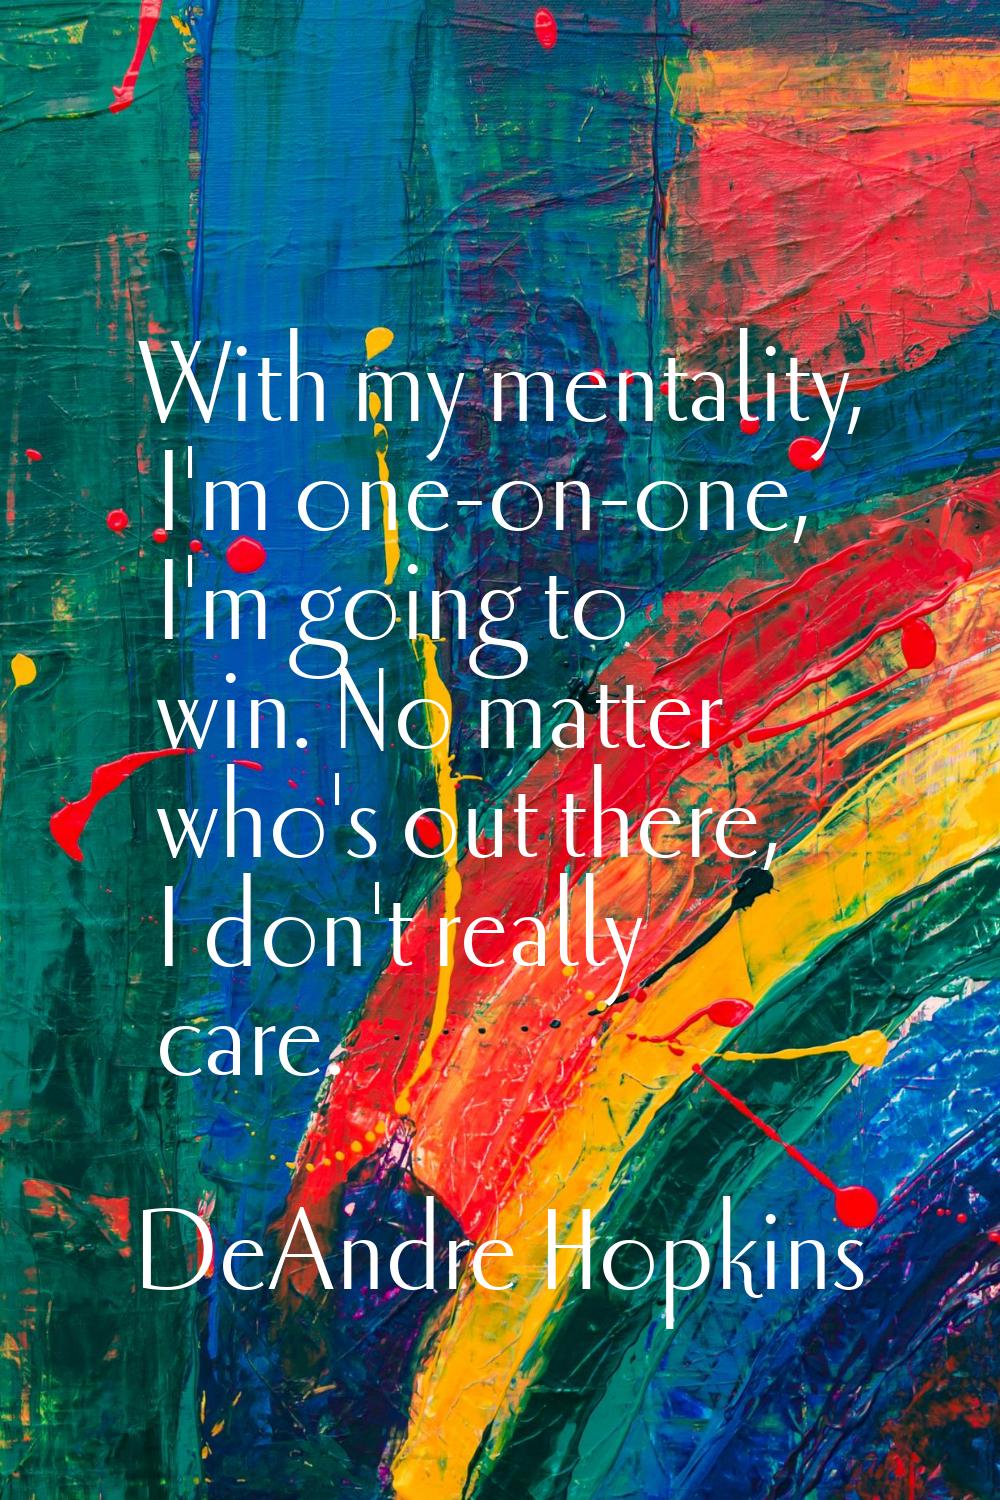 With my mentality, I'm one-on-one, I'm going to win. No matter who's out there, I don't really care